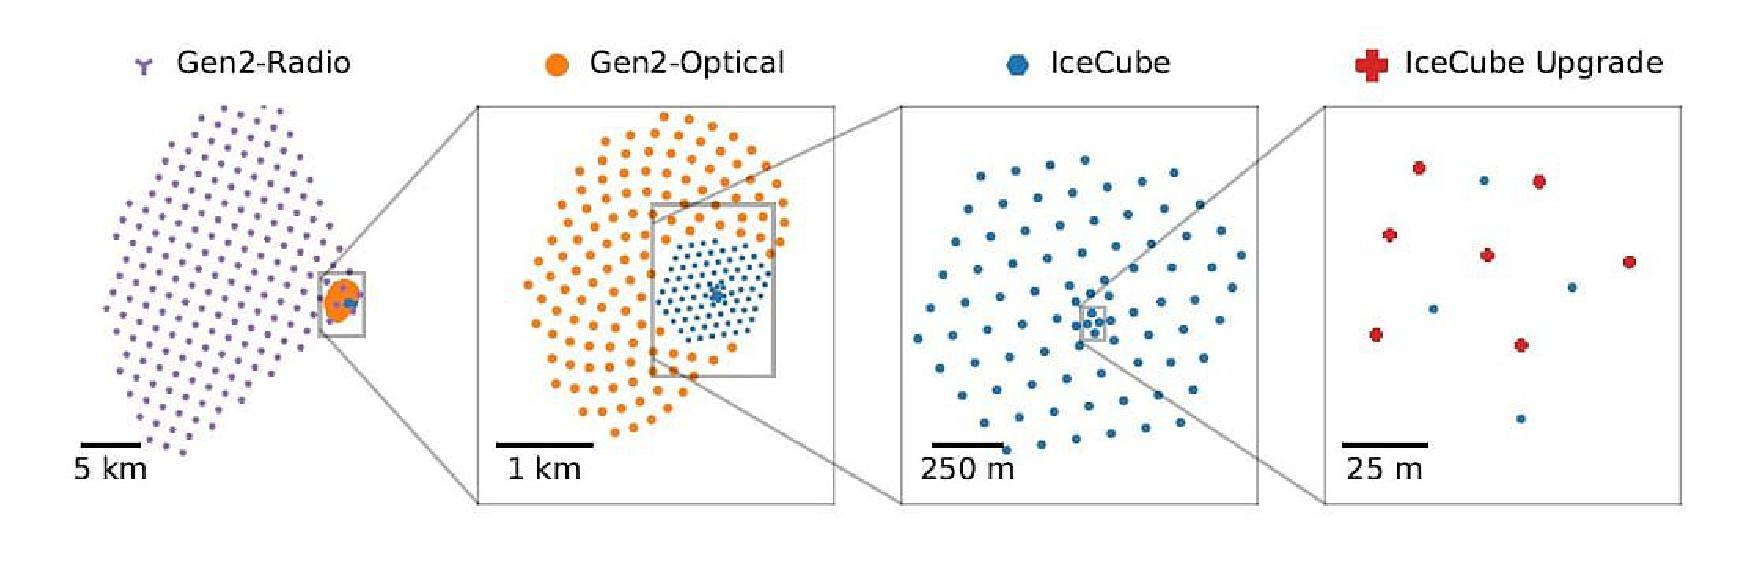 Figure 15: Top view of the envisioned IceCube-Gen2 Neutrino Observatory facility at the South Pole. From left to right: The radio array consisting of 200 stations. IceCube-Gen2 strings in the optical high-energy array, with 120 new strings (shown as orange points) spaced 240 m apart and instrumented with optical modules over a vertical length of 1.25 km. The total instrumented volume in this design is 7.9 times larger than the current IceCube detector array (blue points). On the far right, the layout for the seven IceCube Upgrade strings relative to existing IceCube strings is shown (image credit: IceCube Collaboration)